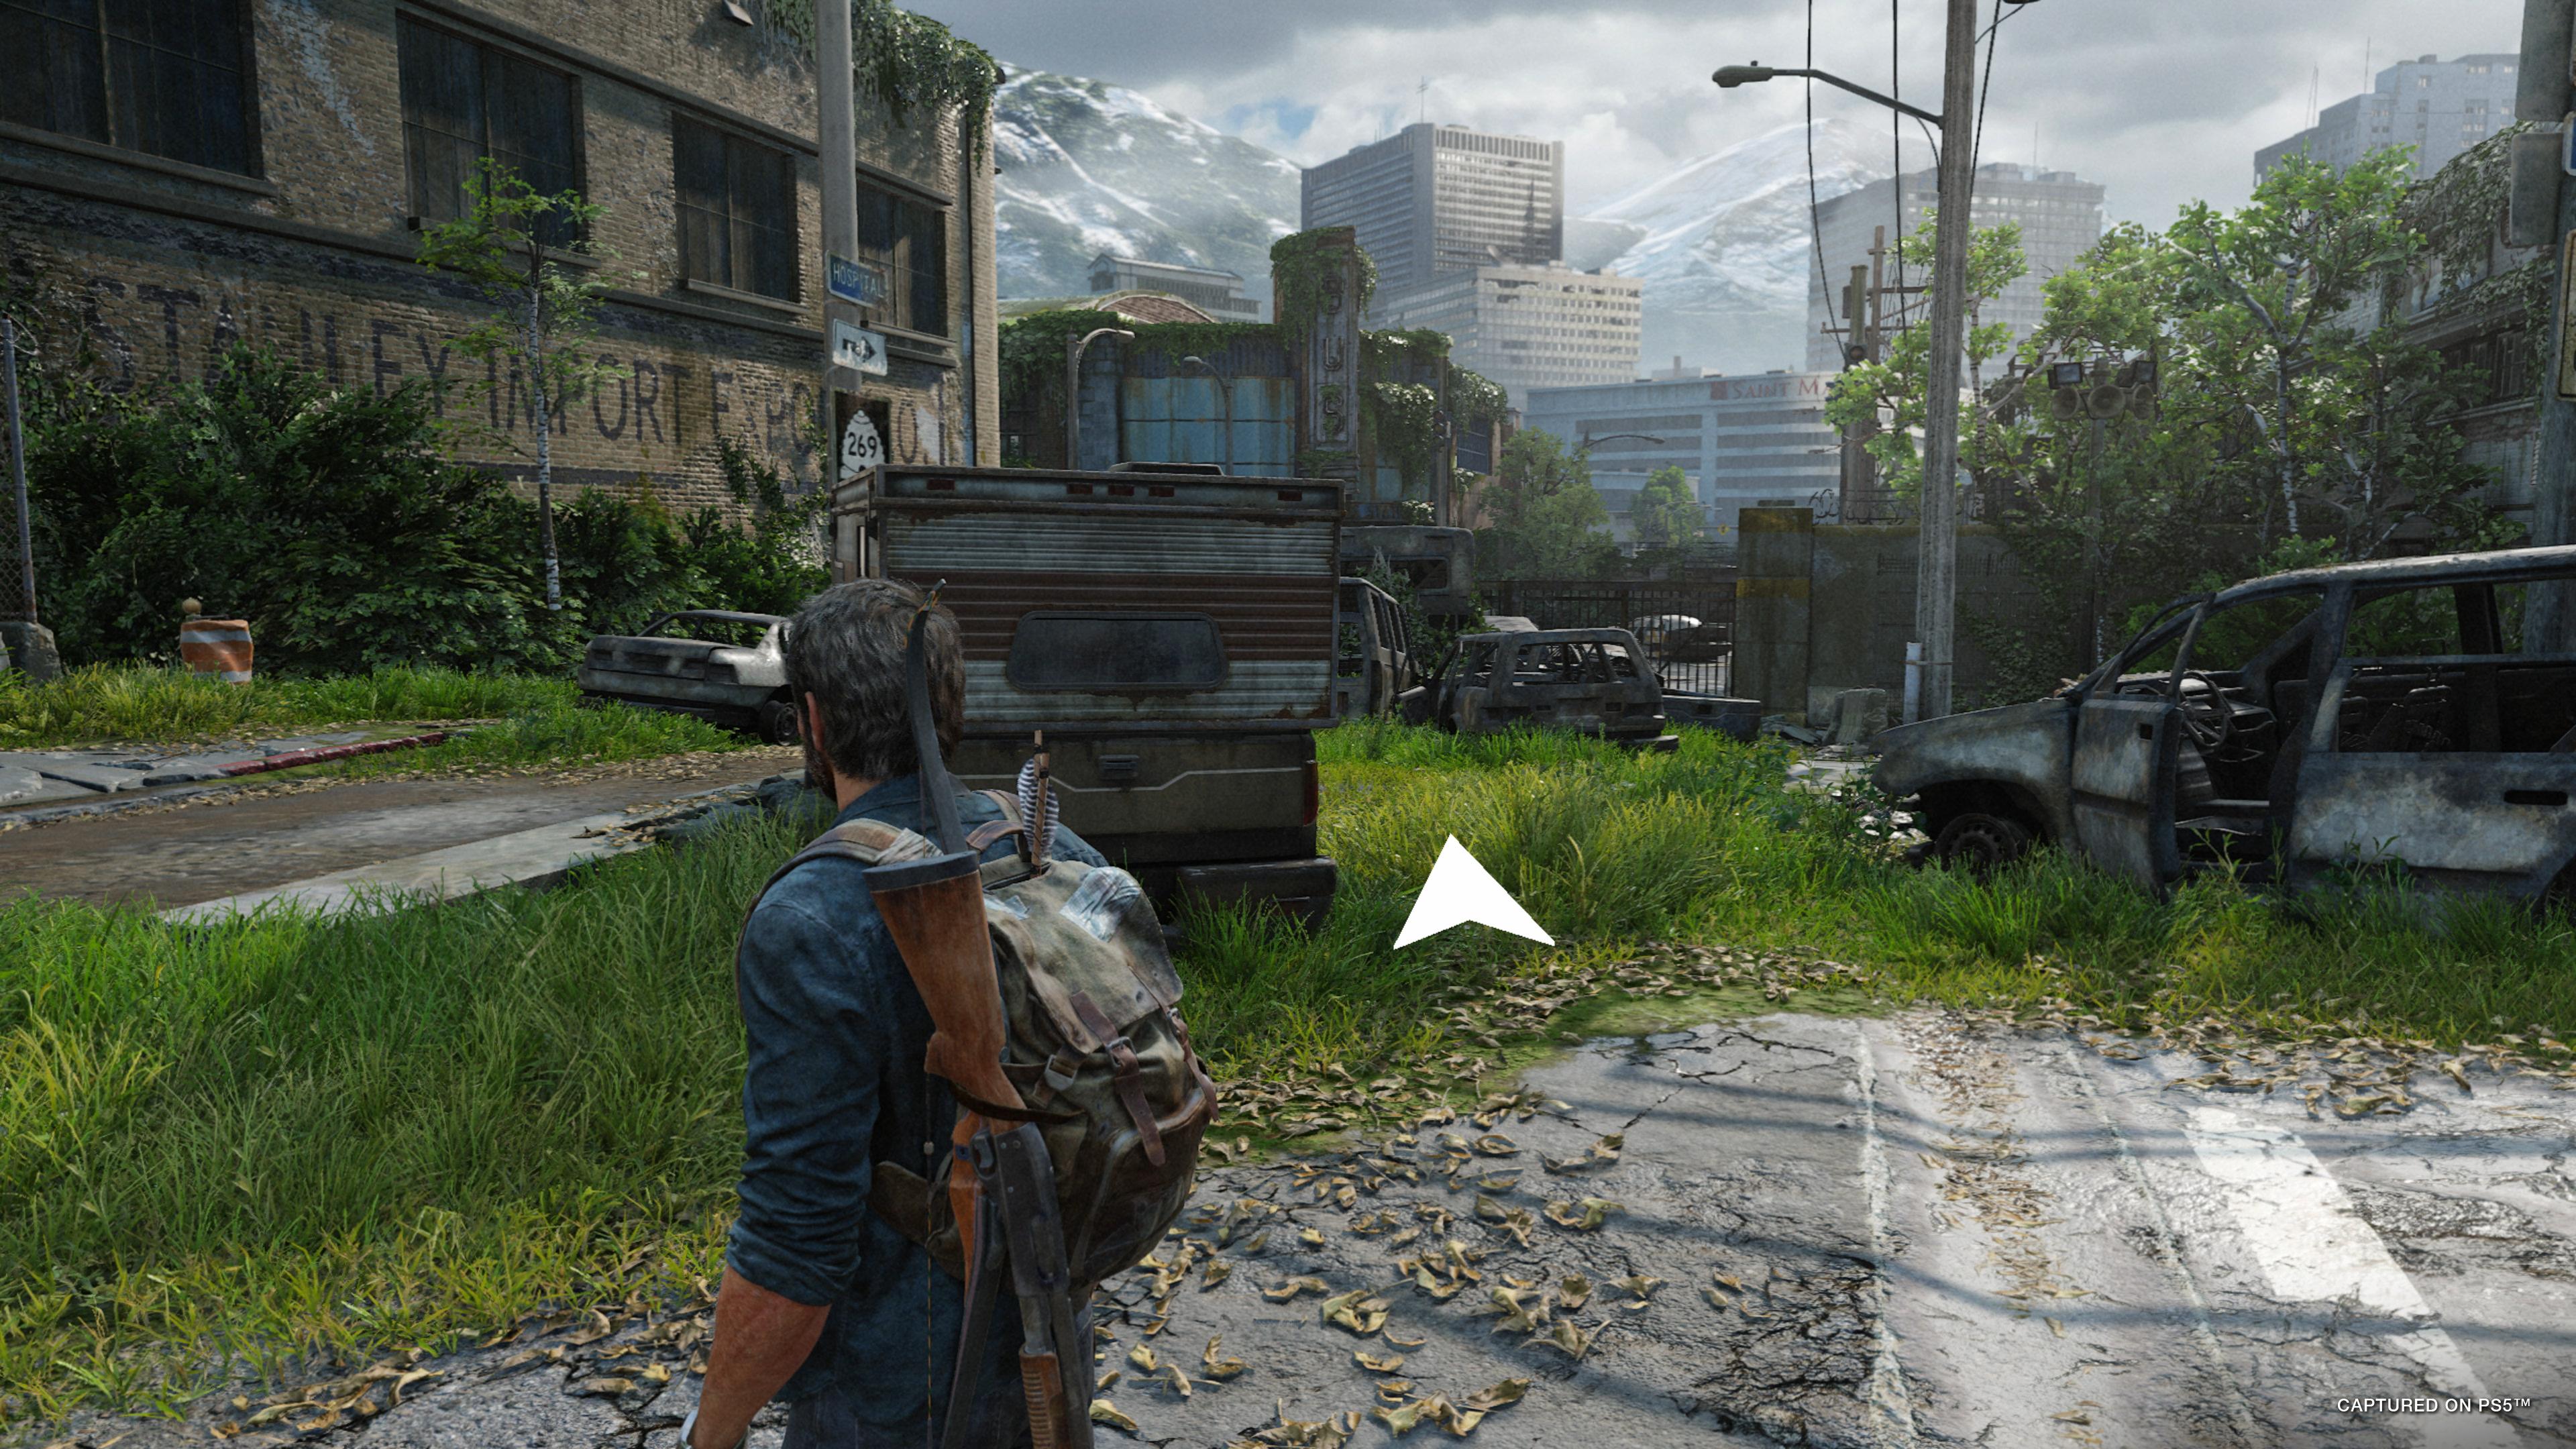 The Last of Us Part 1 Means Much More on PC Than It Does On PS5